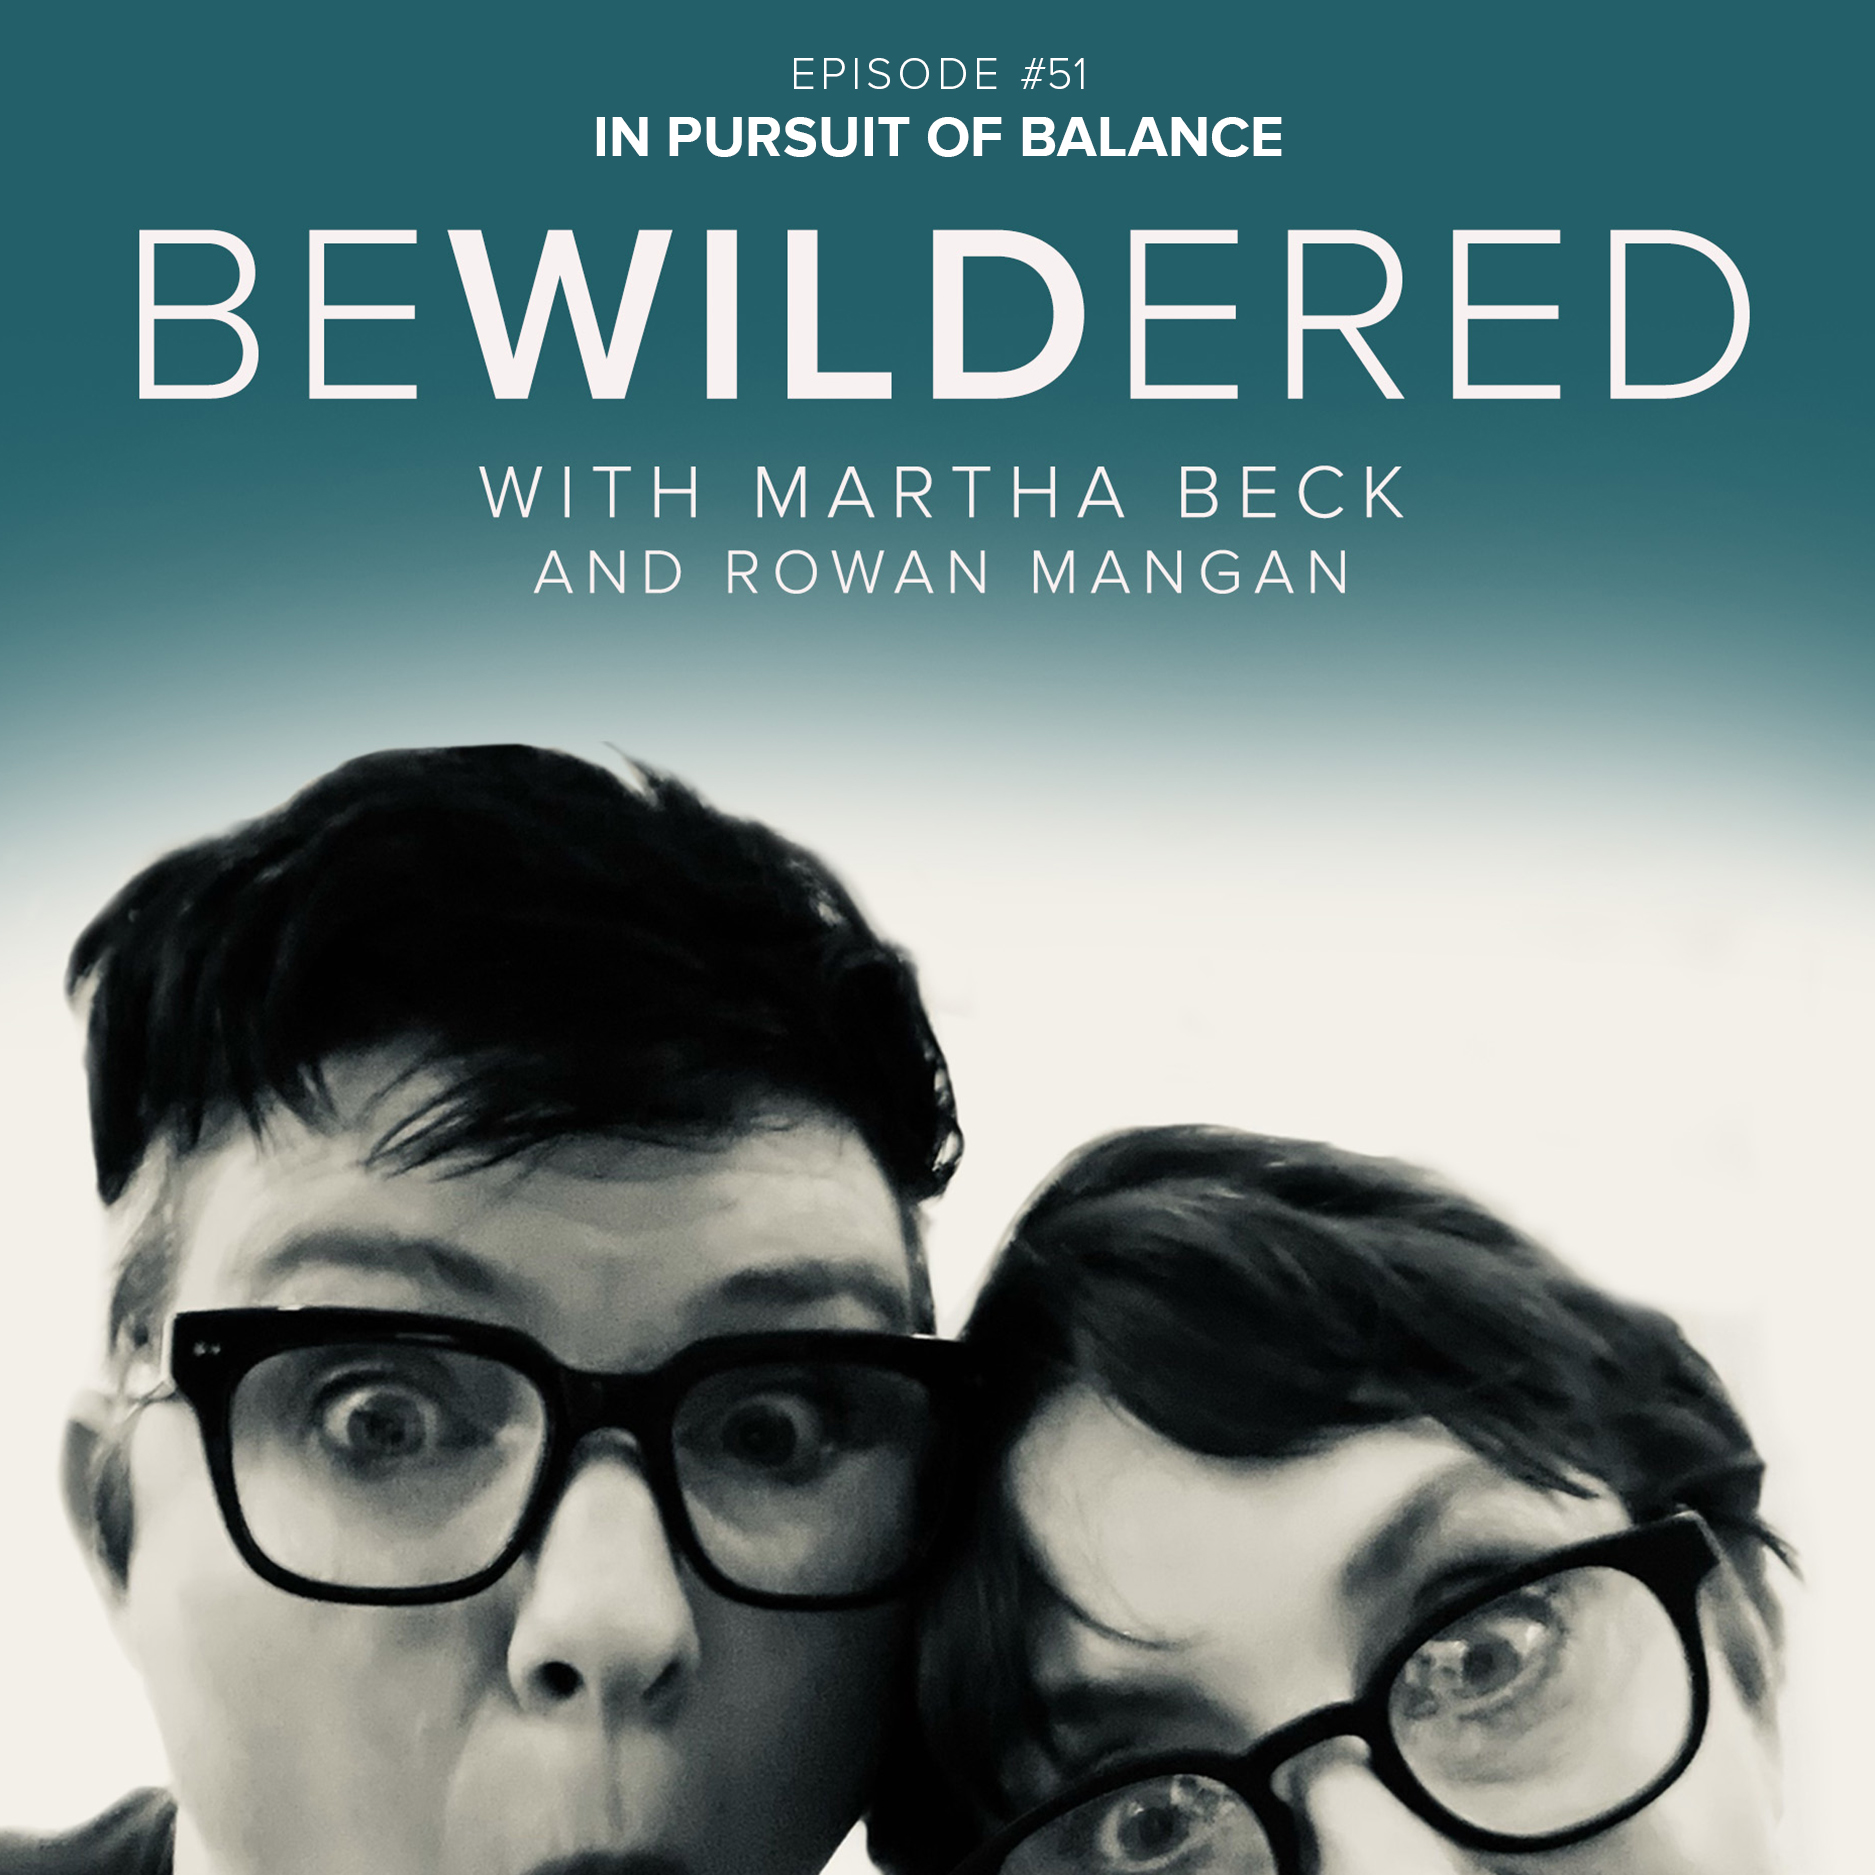 Image for Episode #51 In Pursuit of Balance for the Bewildered Podcast with Martha Beck and Rowan Mangan